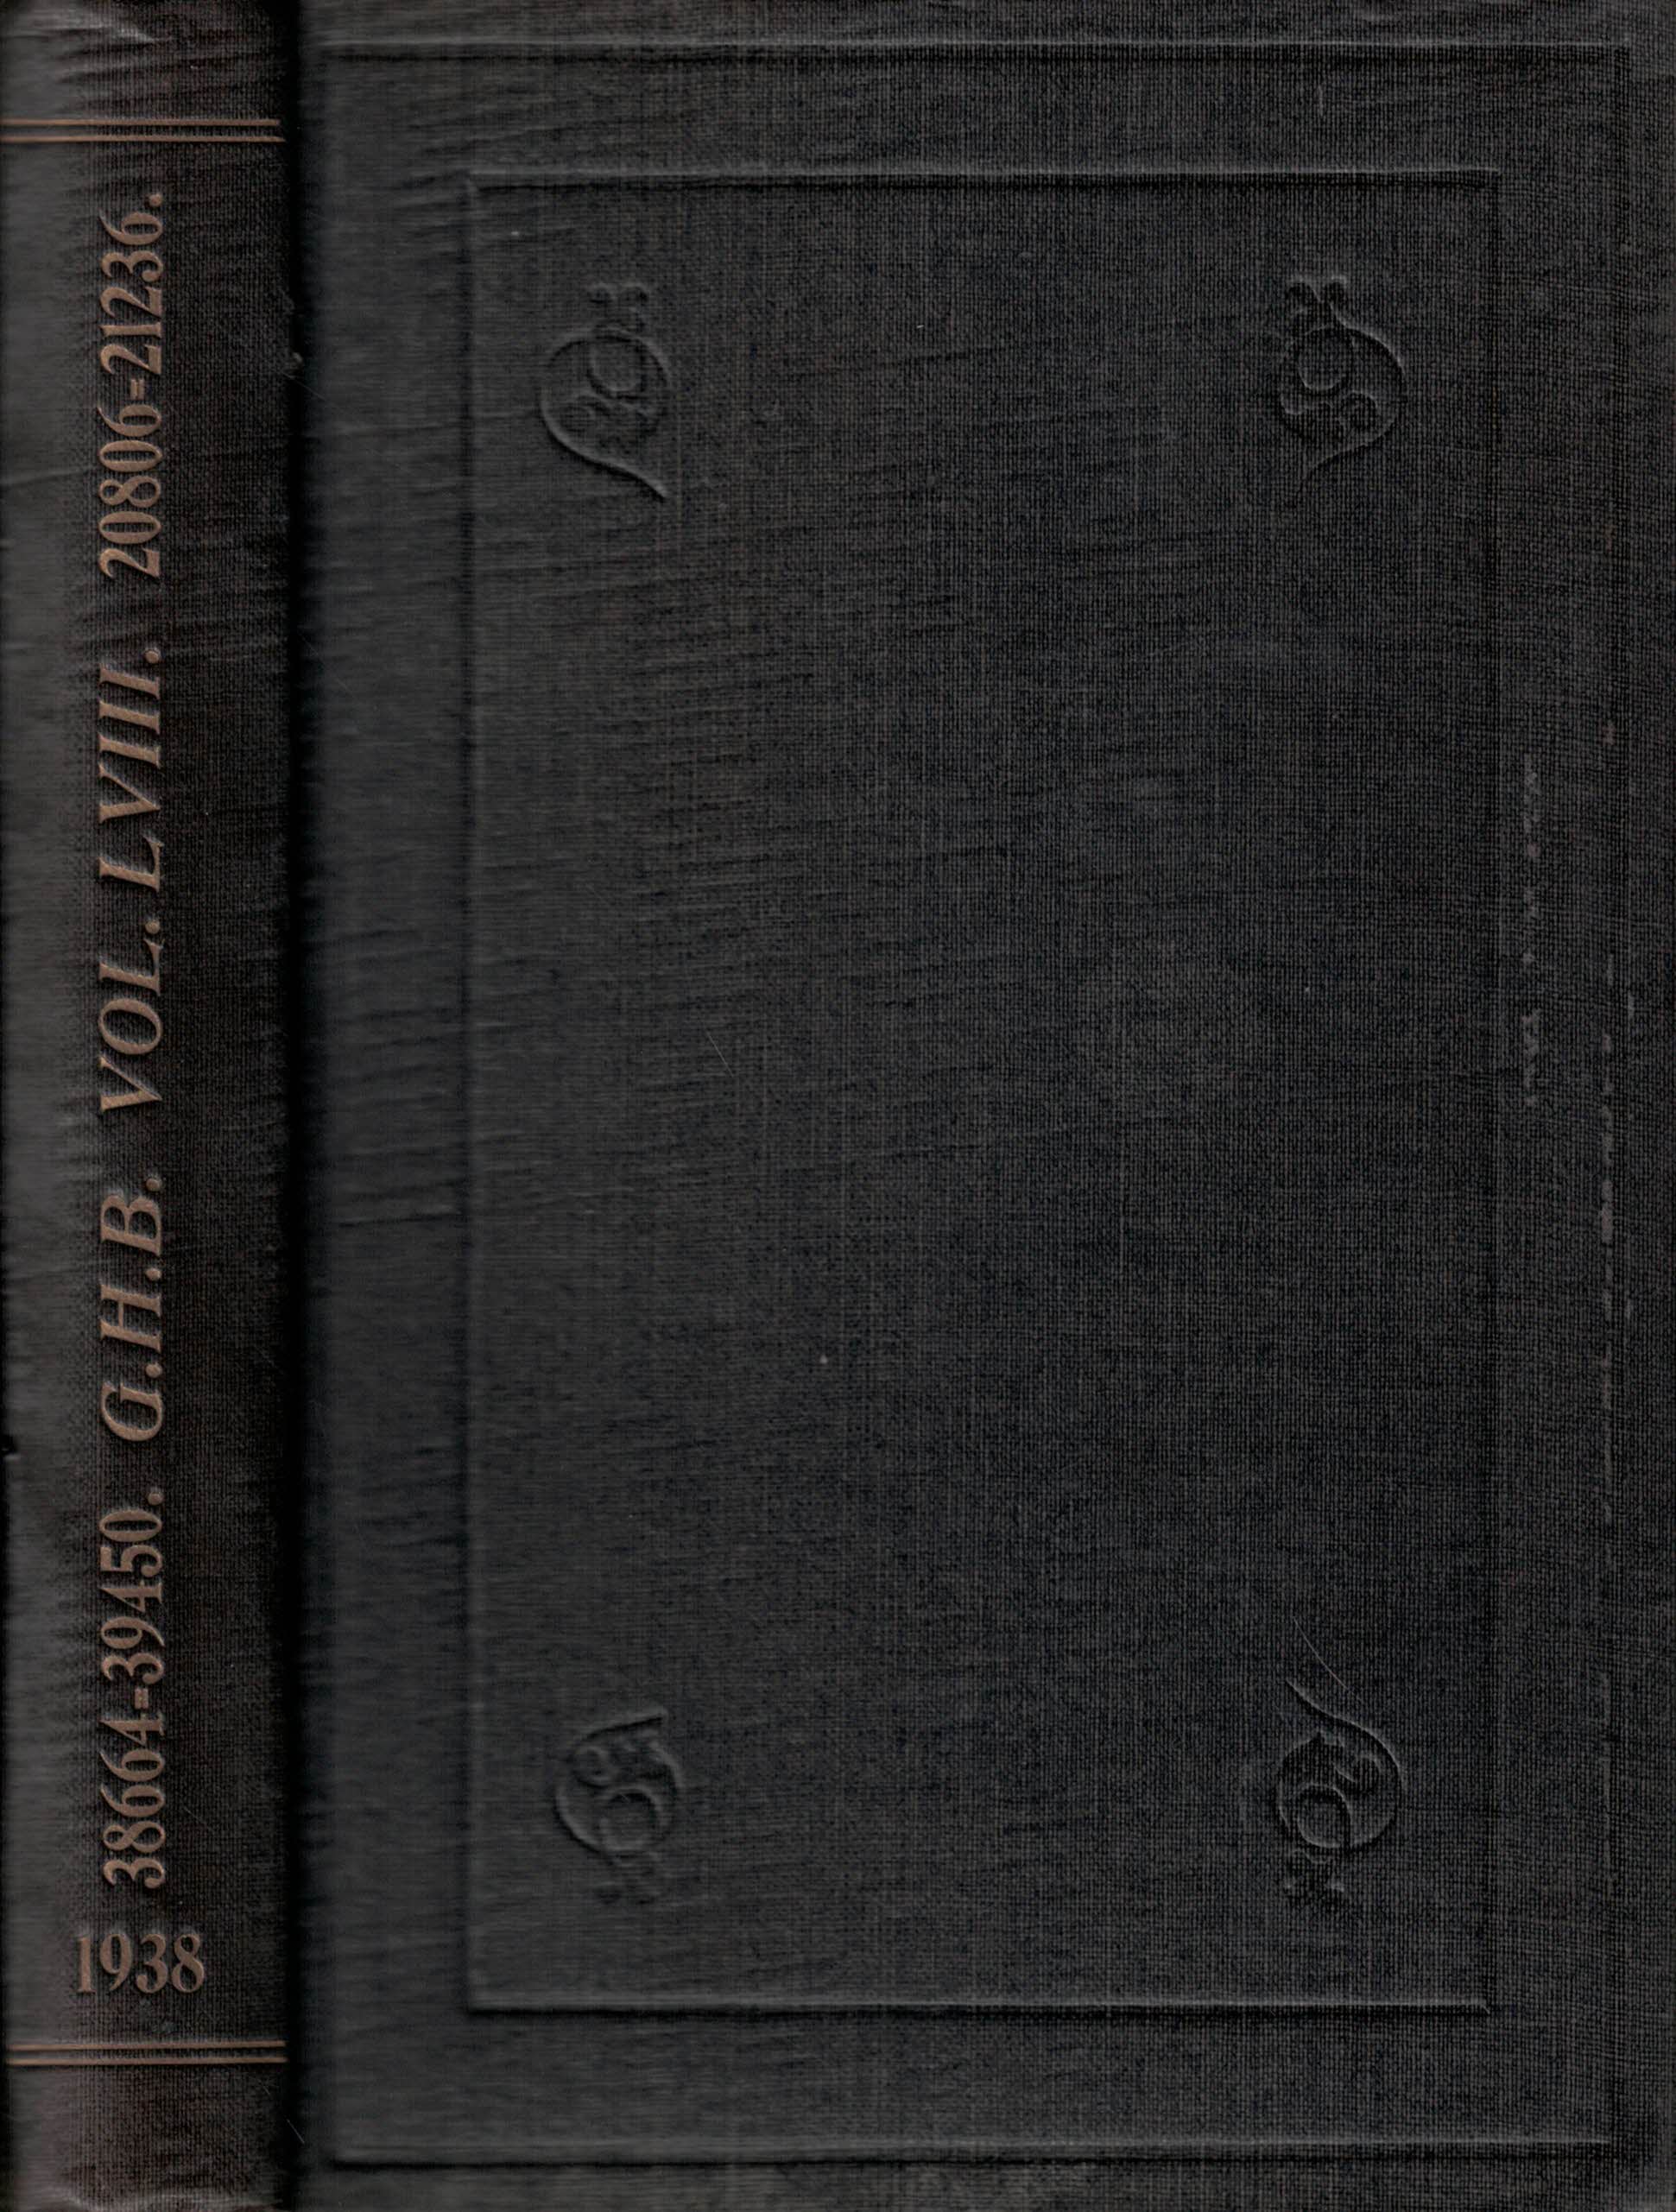 The Galloway Herd Book, Containing Pedigrees of Pure-Bred Galloway Cattle. Volume LVIII [58]. 1938.